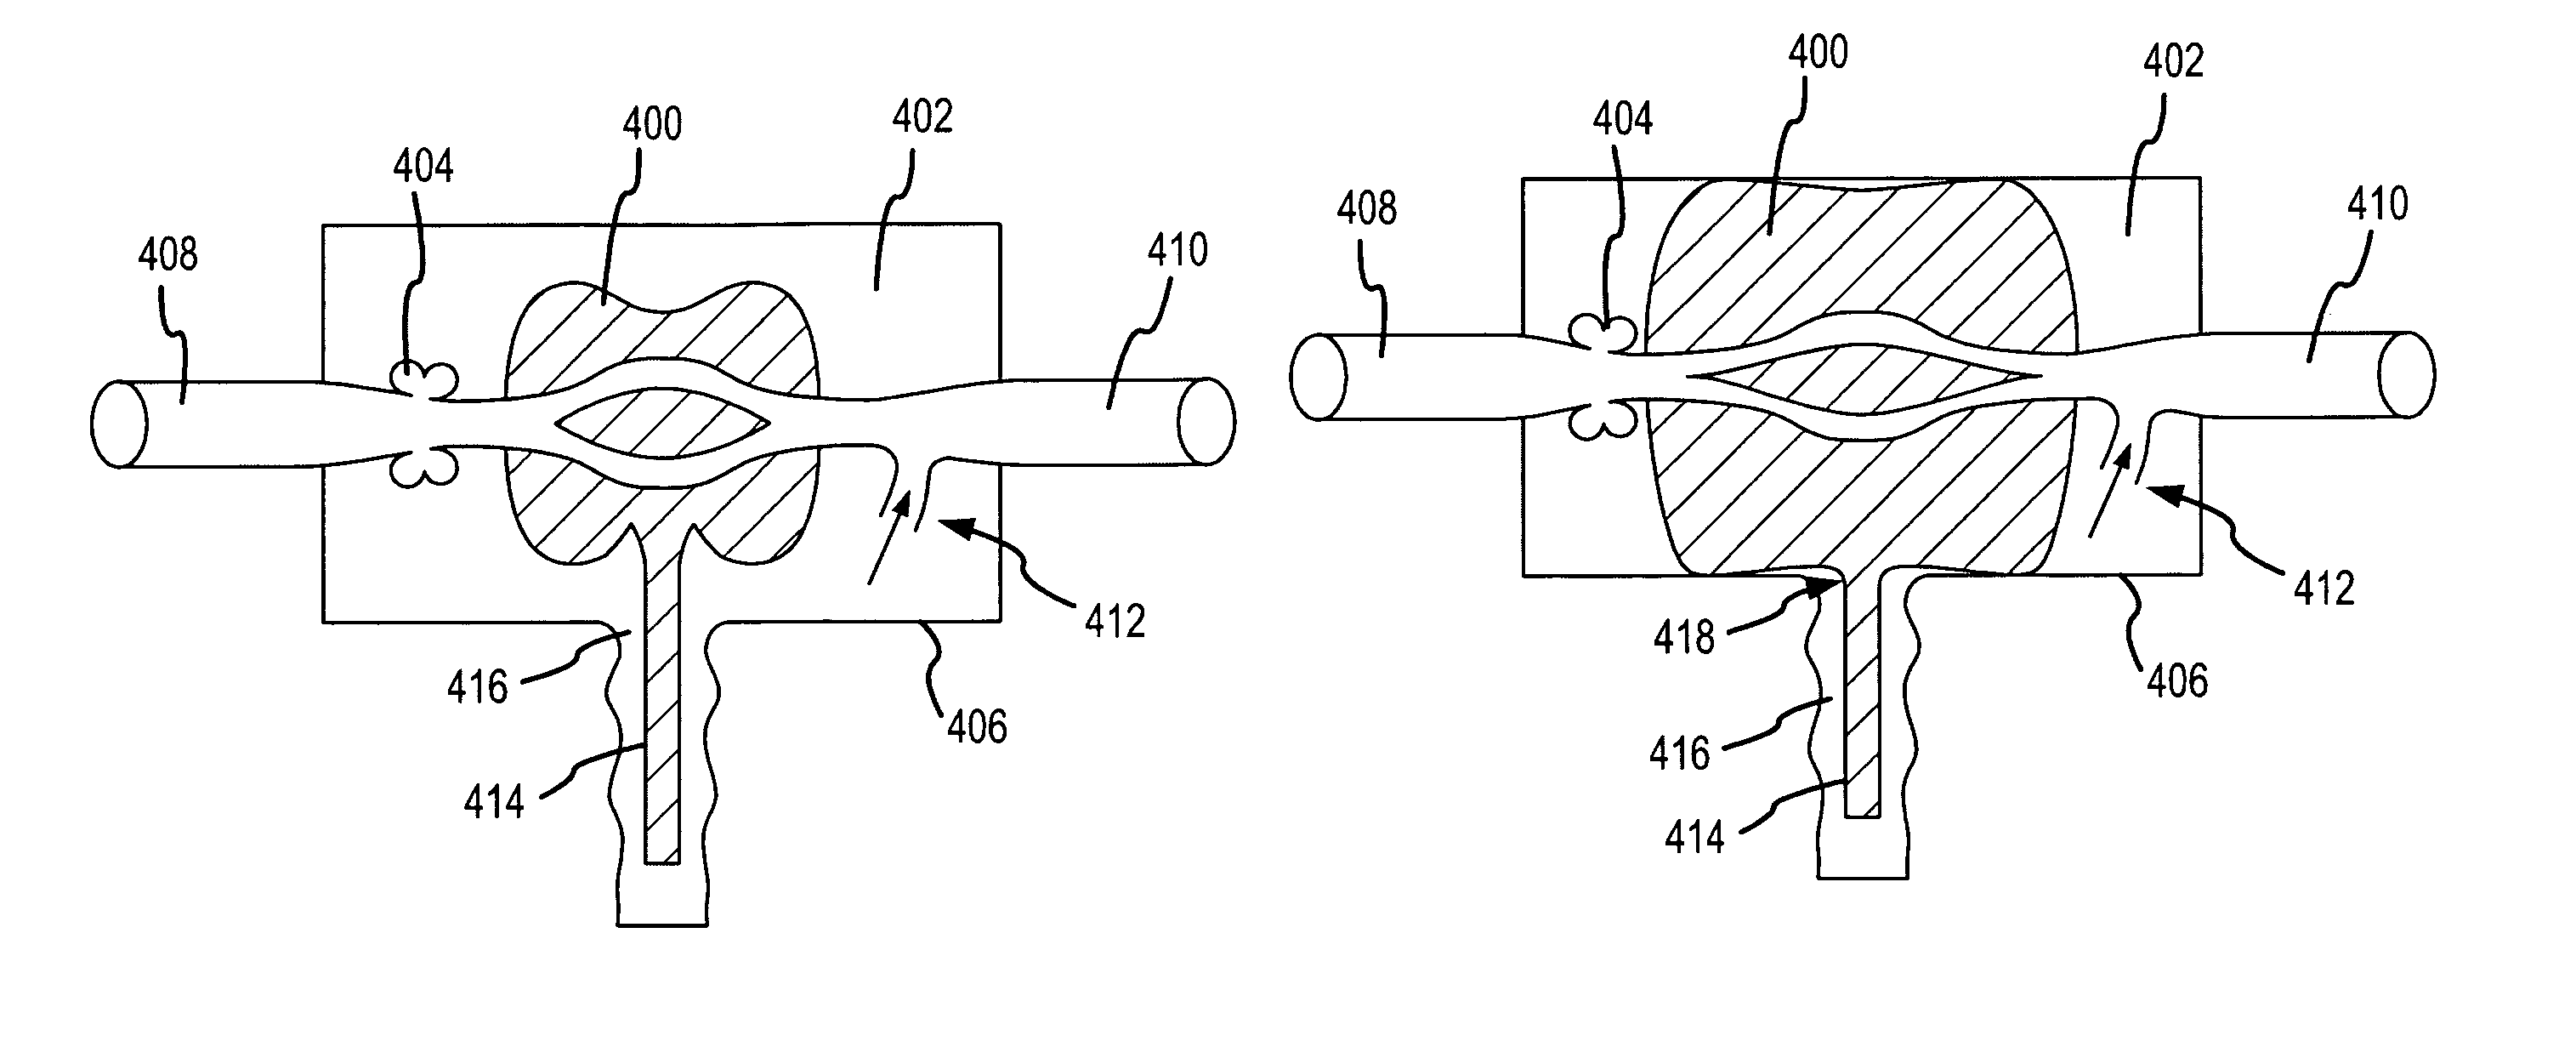 Systems and methods for increasing cerebral spinal fluid flow